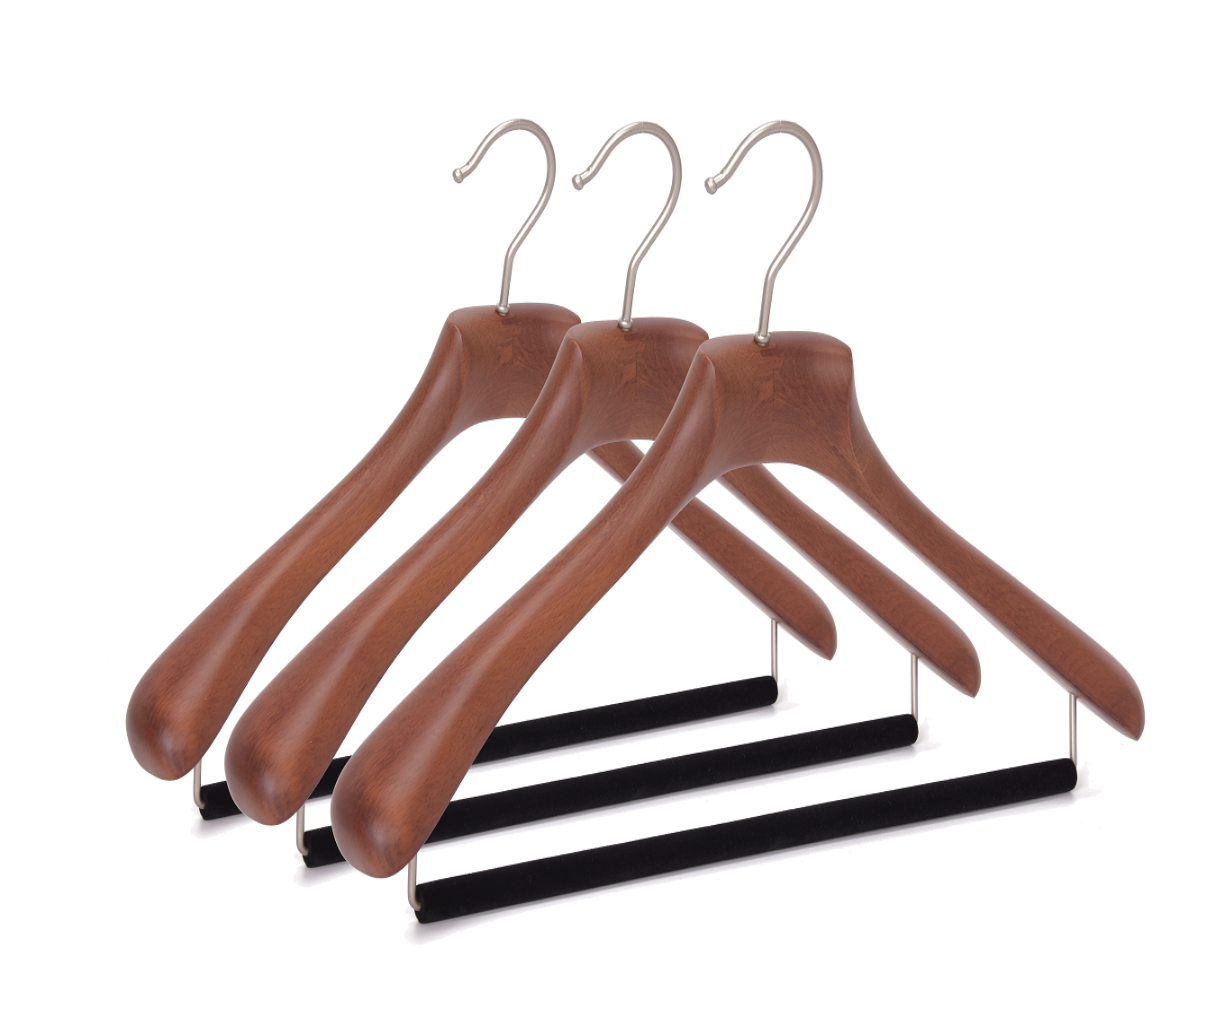 10 Quality Hangers Curved Wooden Hangers Beautiful Sturdy Suit Coat Hangers  with Locking Bar Gold Hooks Walnut Finish (10)